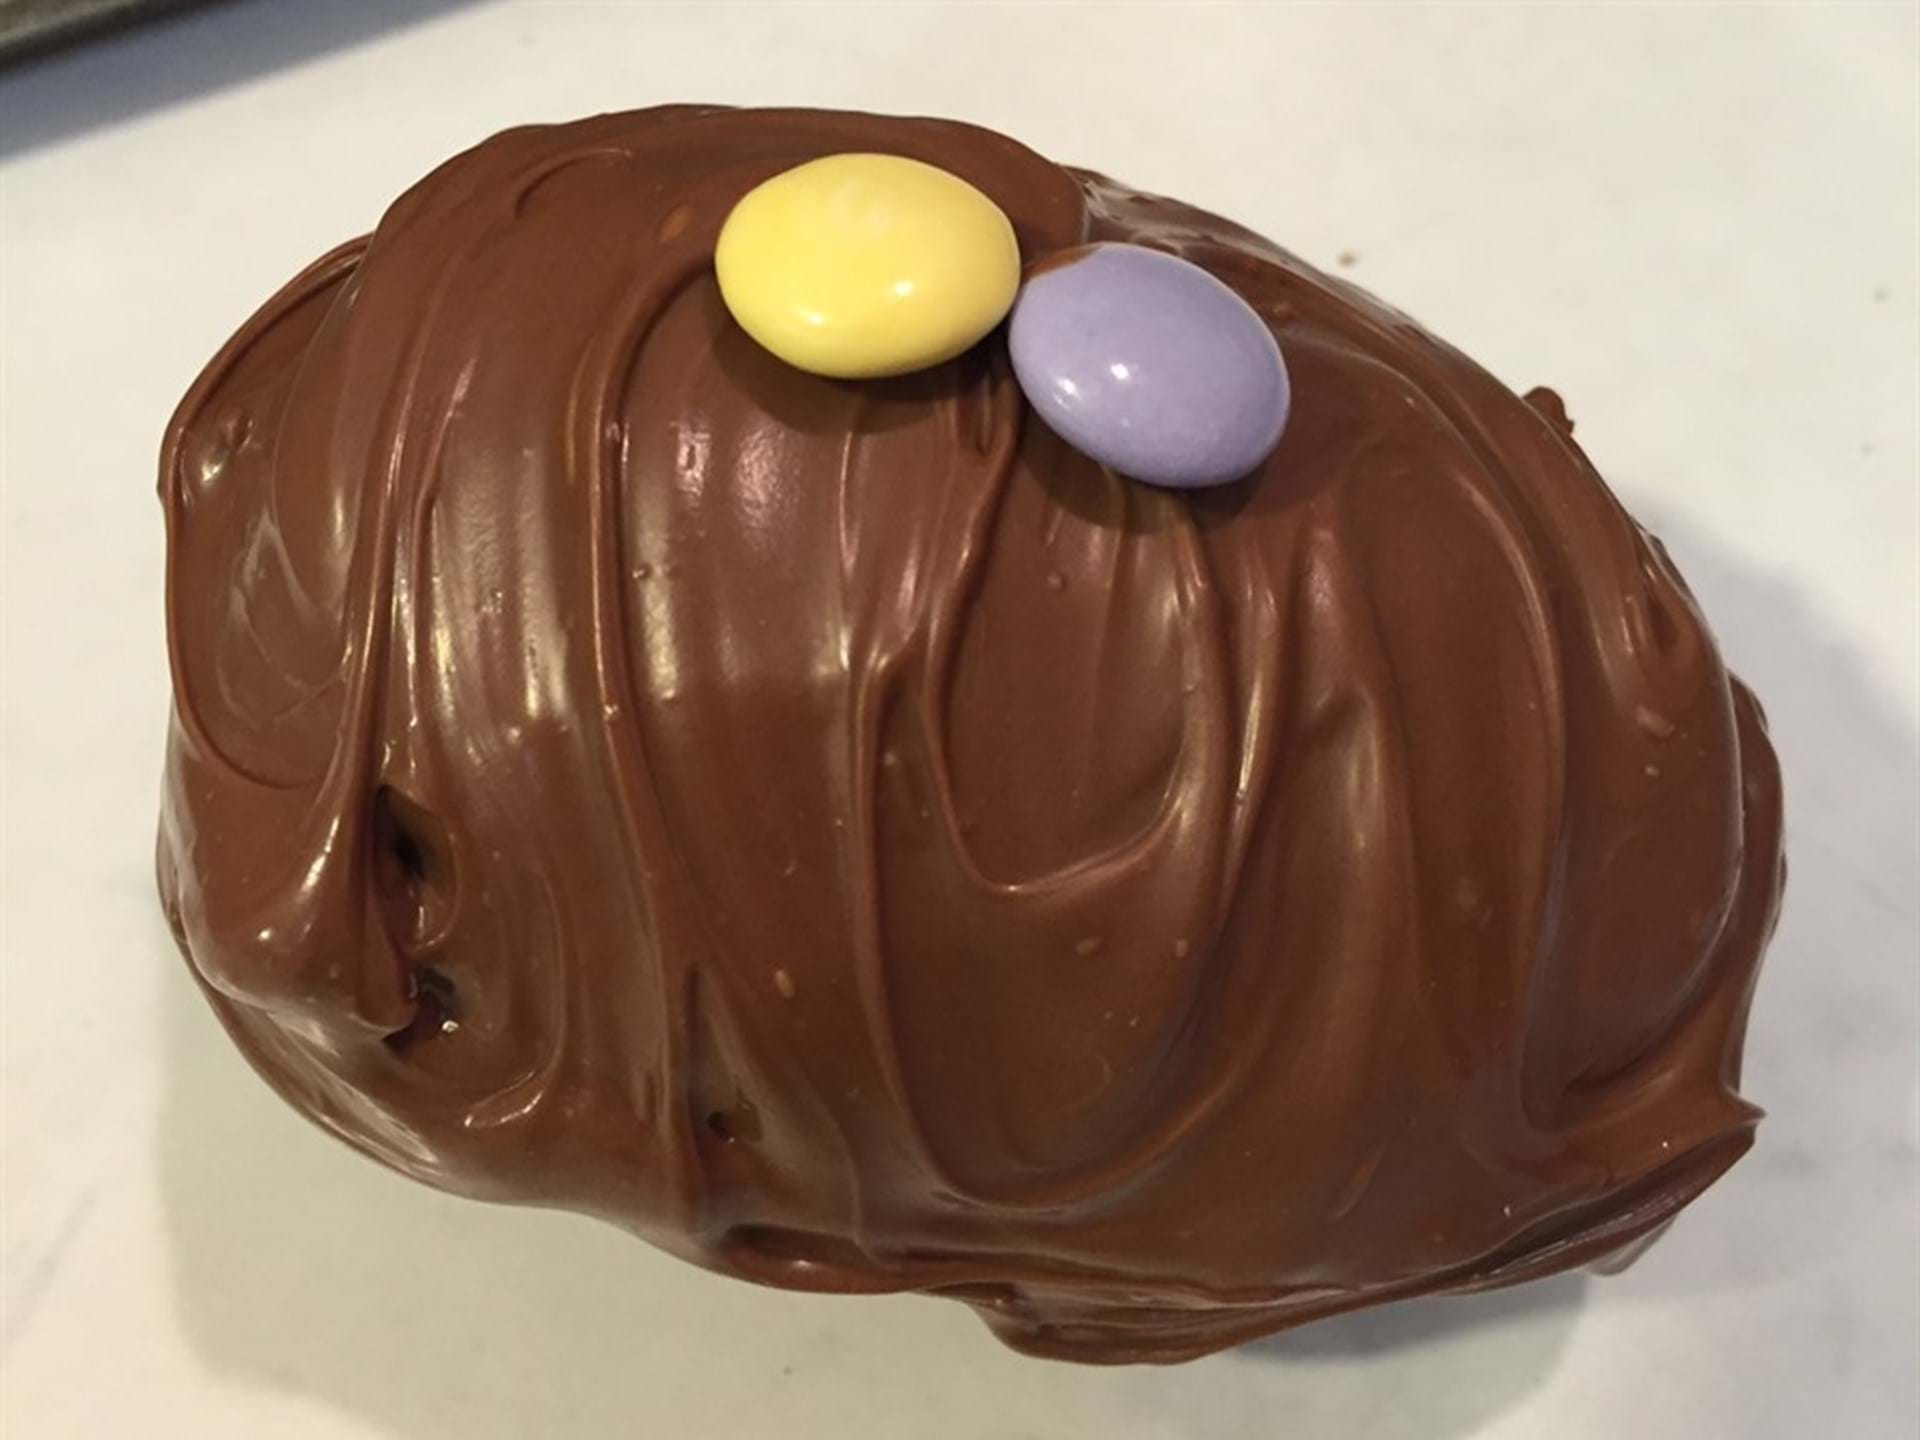 Piper's Chocolate Egg